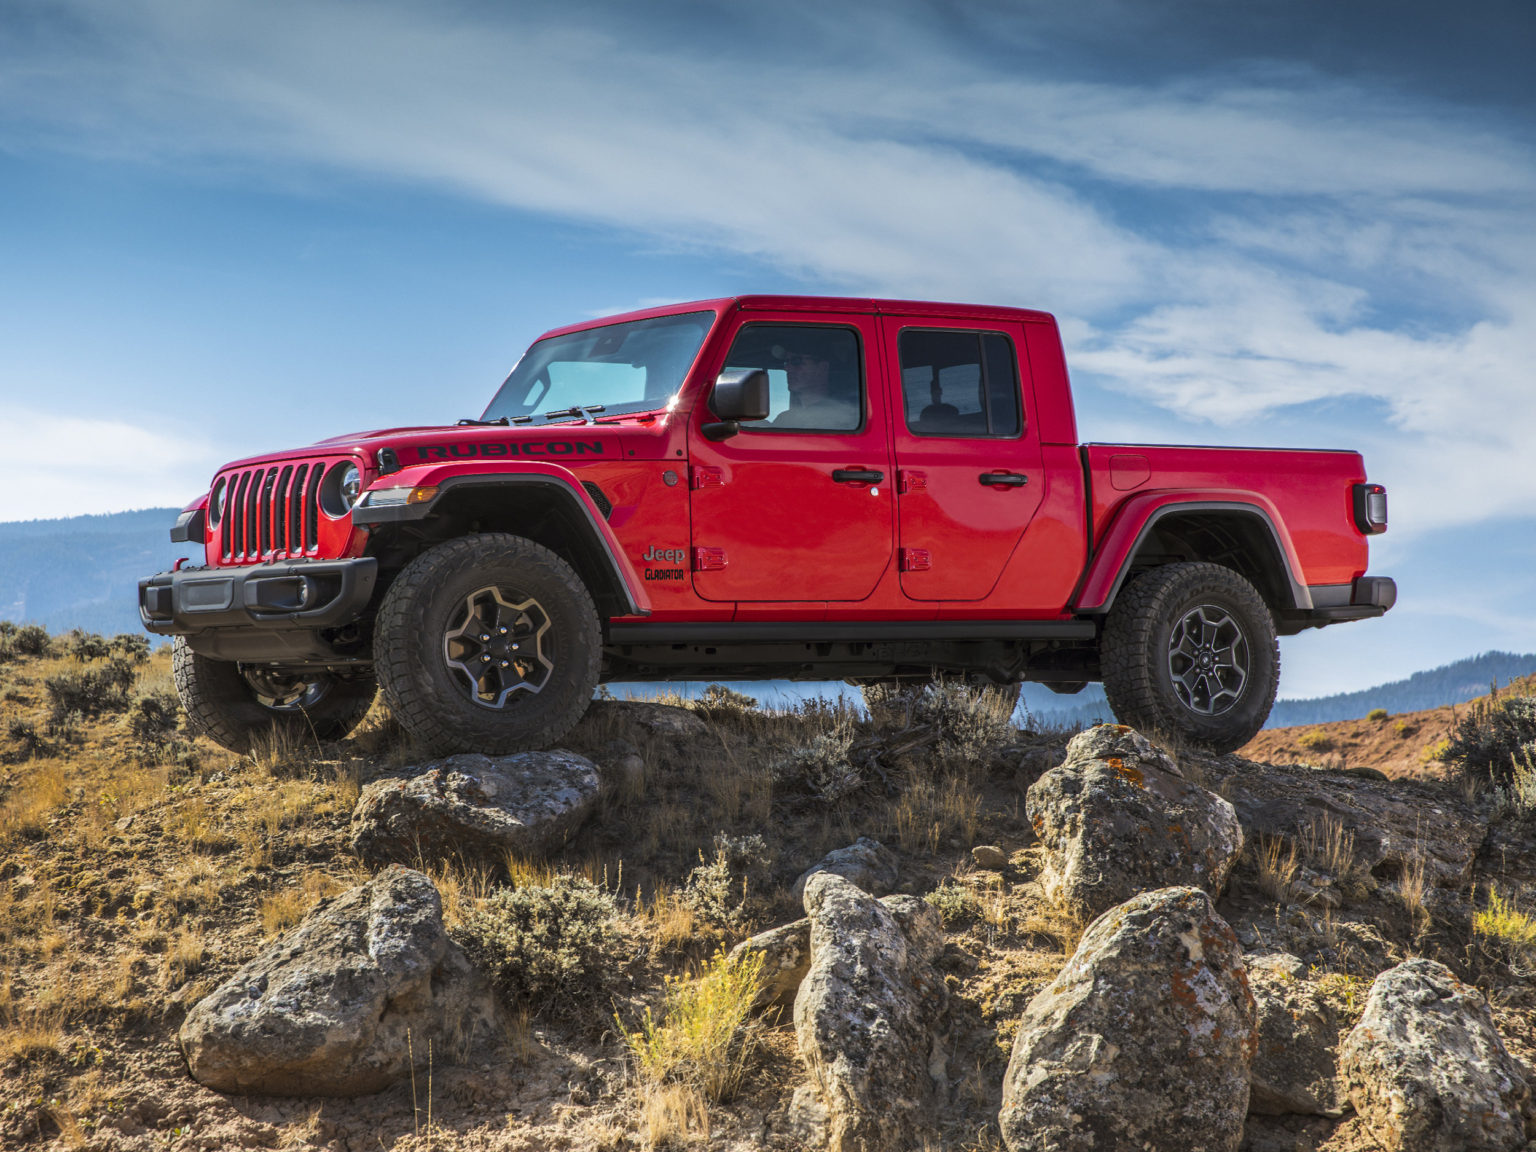 The Jeep Gladiator will be getting a diesel option for 2021.